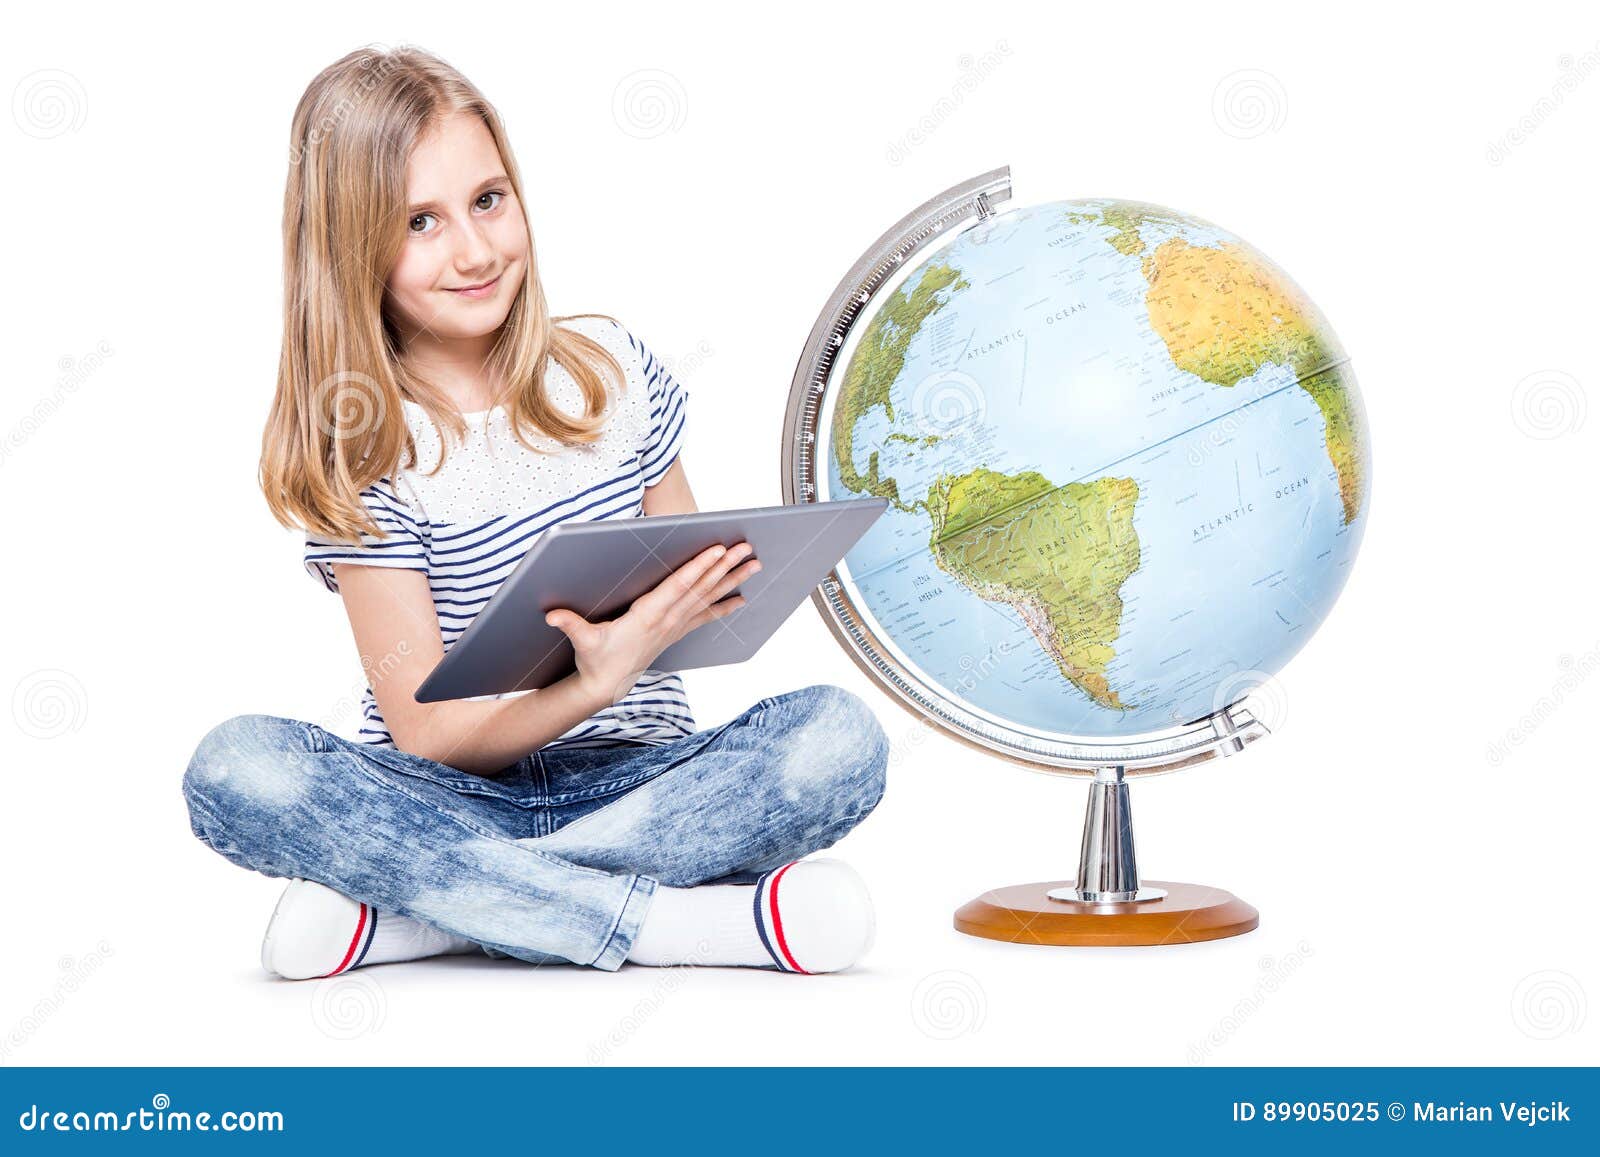 cute little young girl with tablet and globe. schoolgirl using modern technology in teaching geography